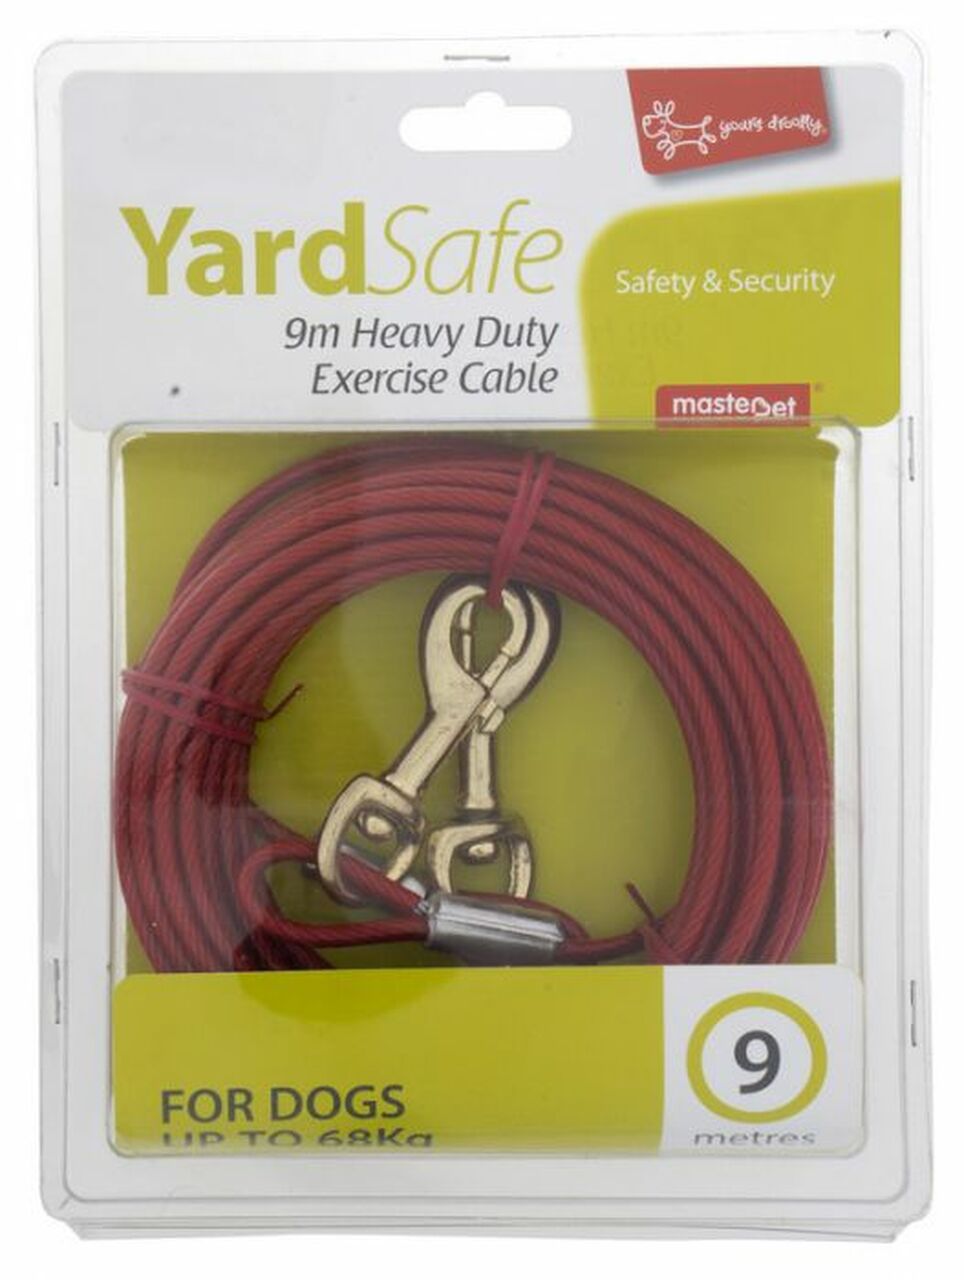 Yours Droolly Exercise Cable For Dogs 9 metres cable, Pet Essentials Napier, Dog outdoor cable for dogs up to 68kg